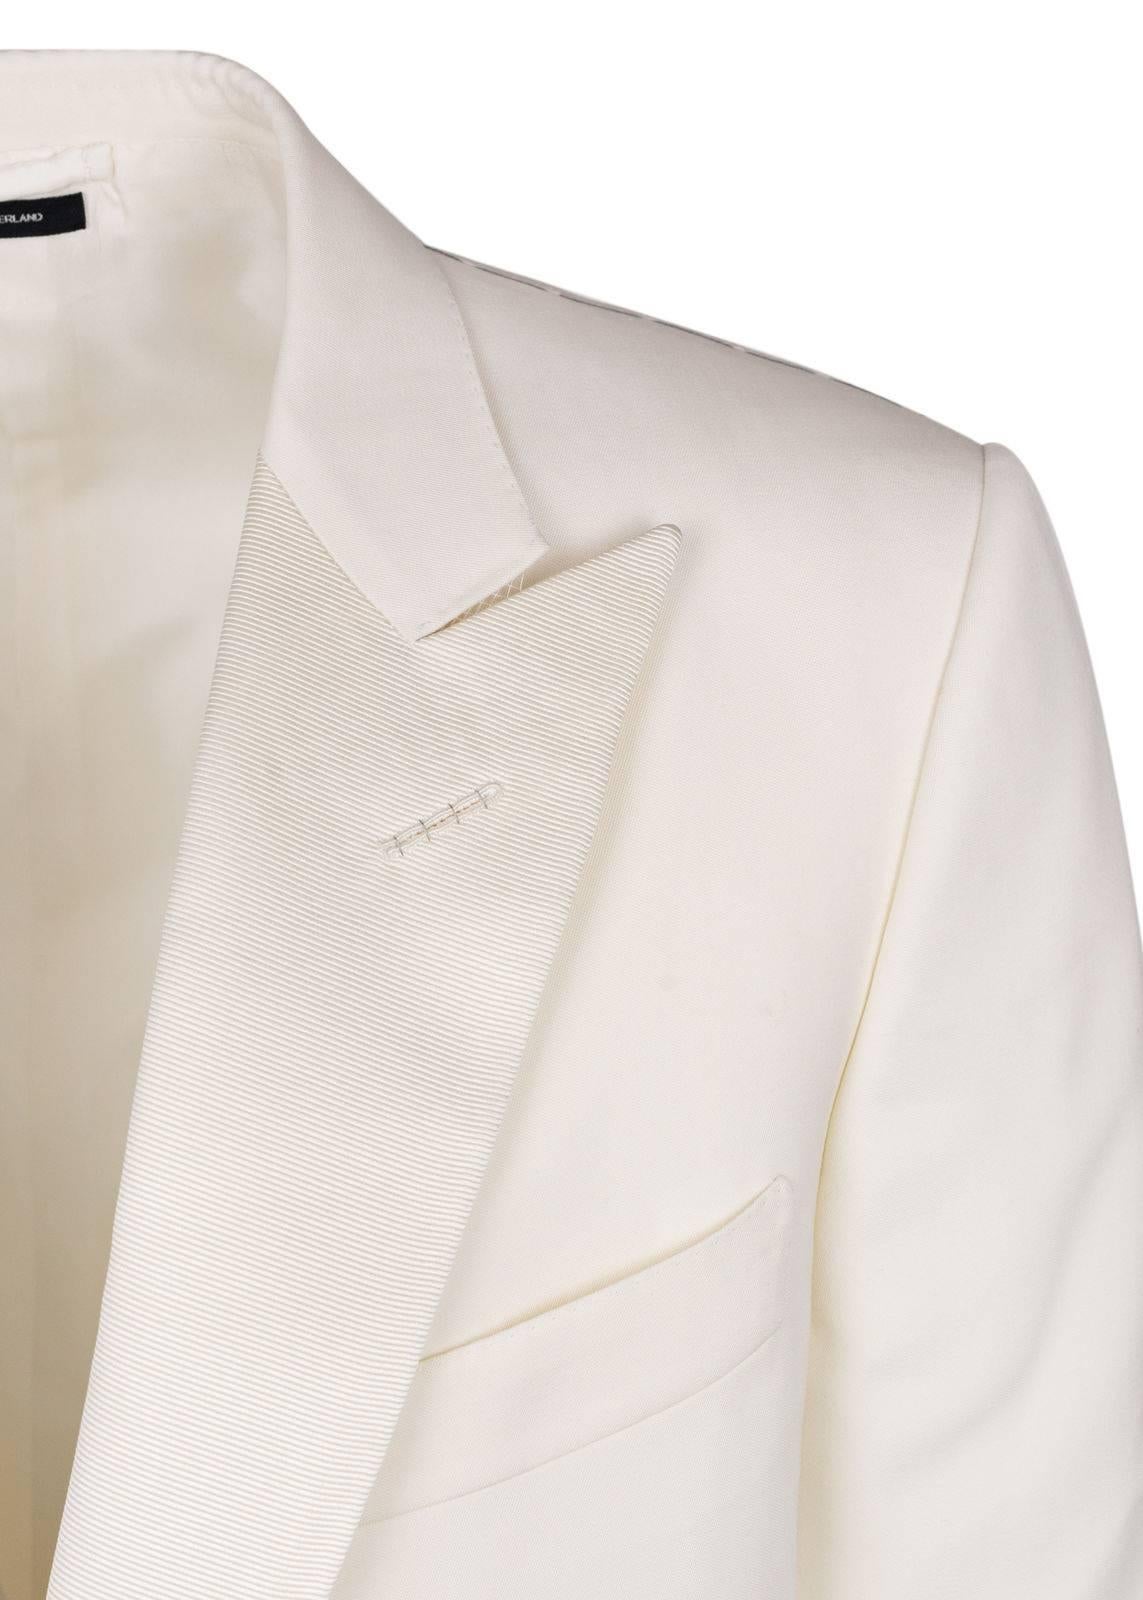 Tom Ford Ivory Wool Blend Peak Lapel O'Connor Cocktail Jacket  In Excellent Condition For Sale In Brooklyn, NY